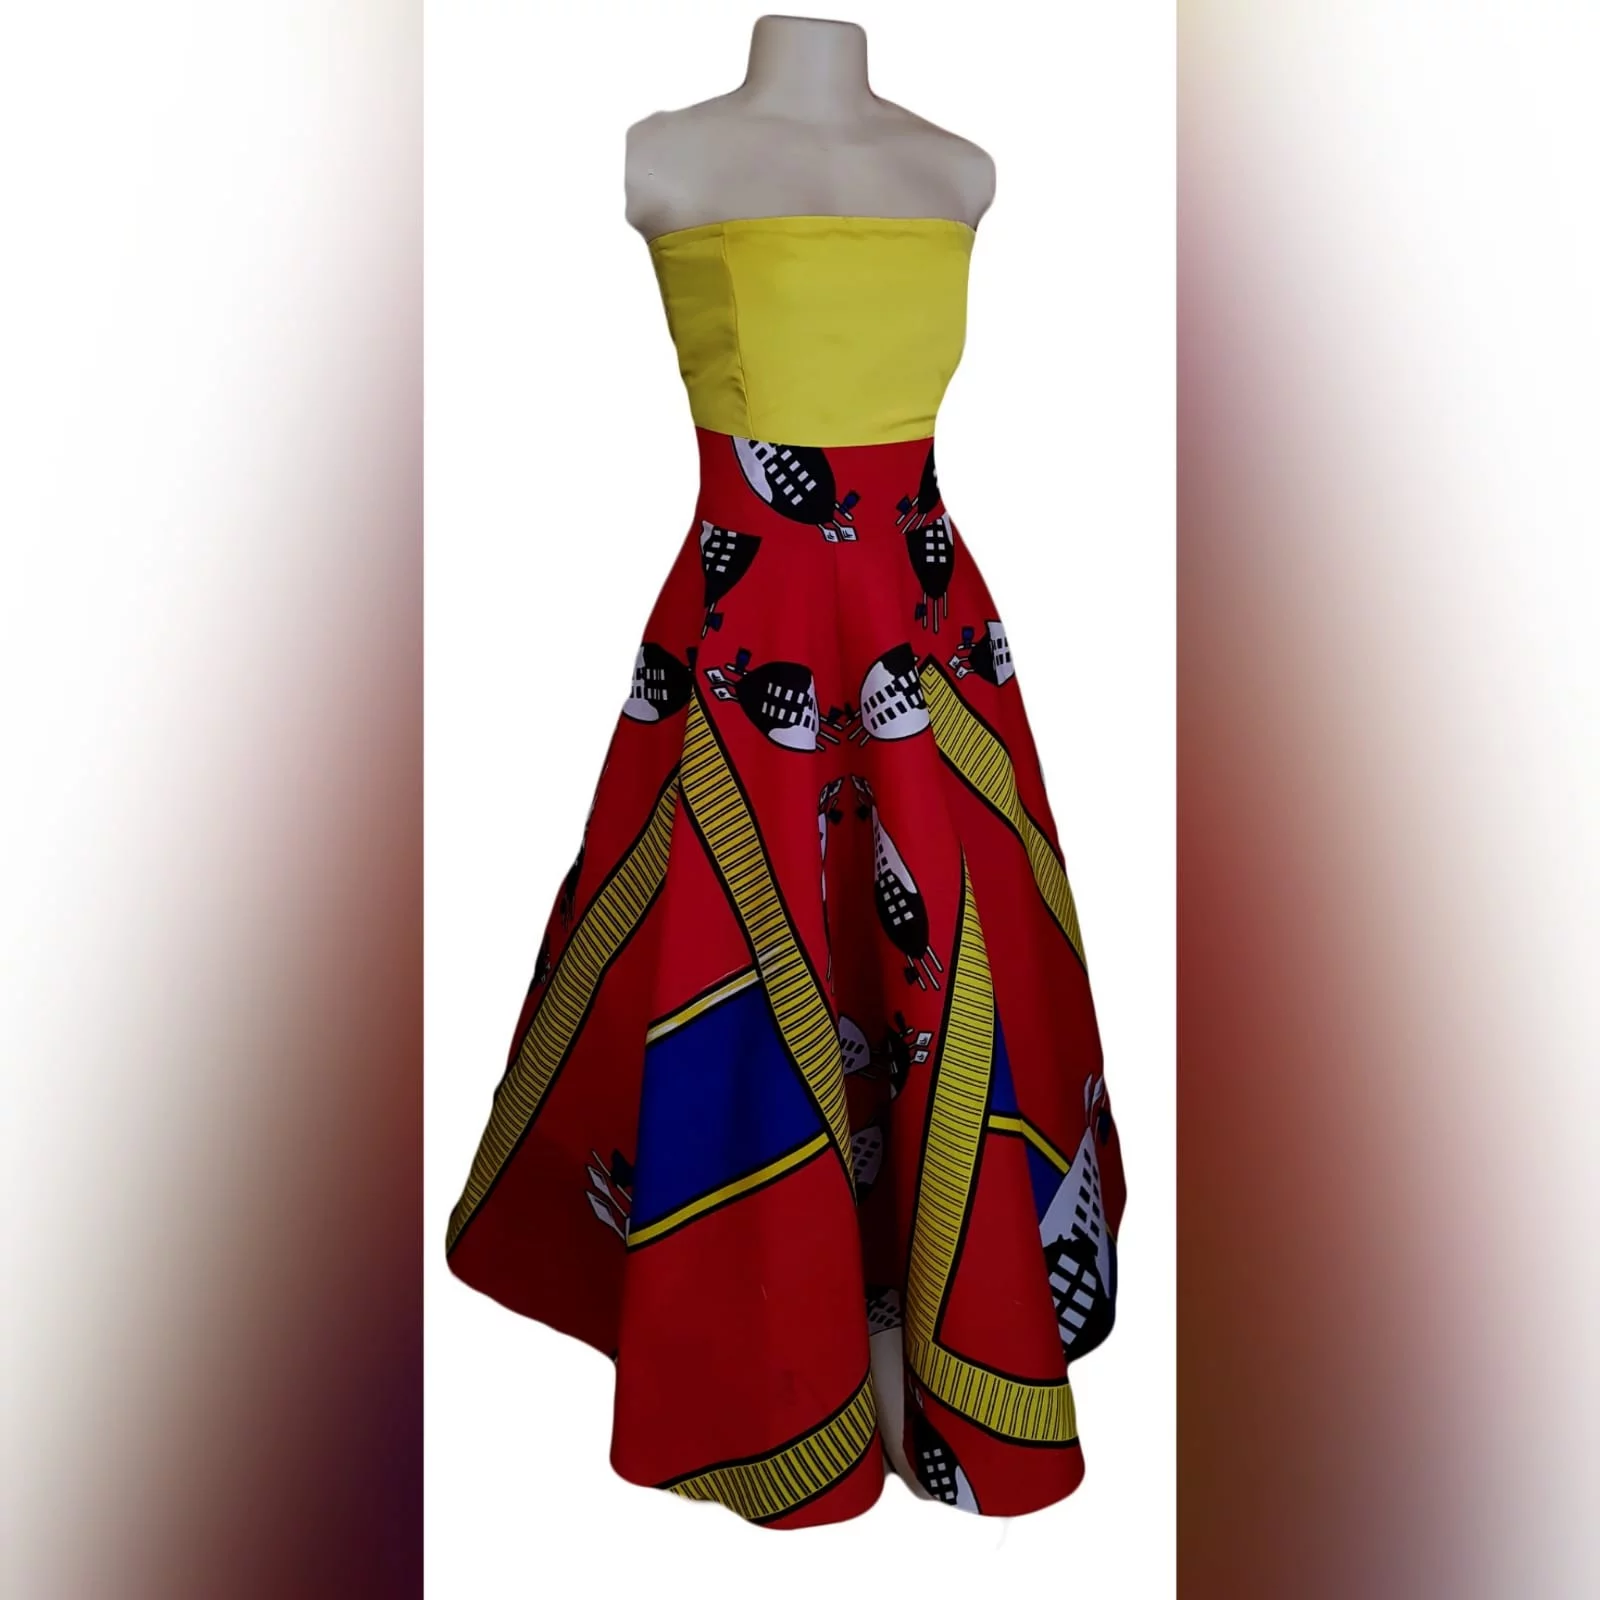 African traditional 2 piece outfit skirt and top 6 african traditional 2 piece outfit skirt and top. Red swati wide skirt with a high waisted effect. Boobtube yellow satin top with a lace-up back